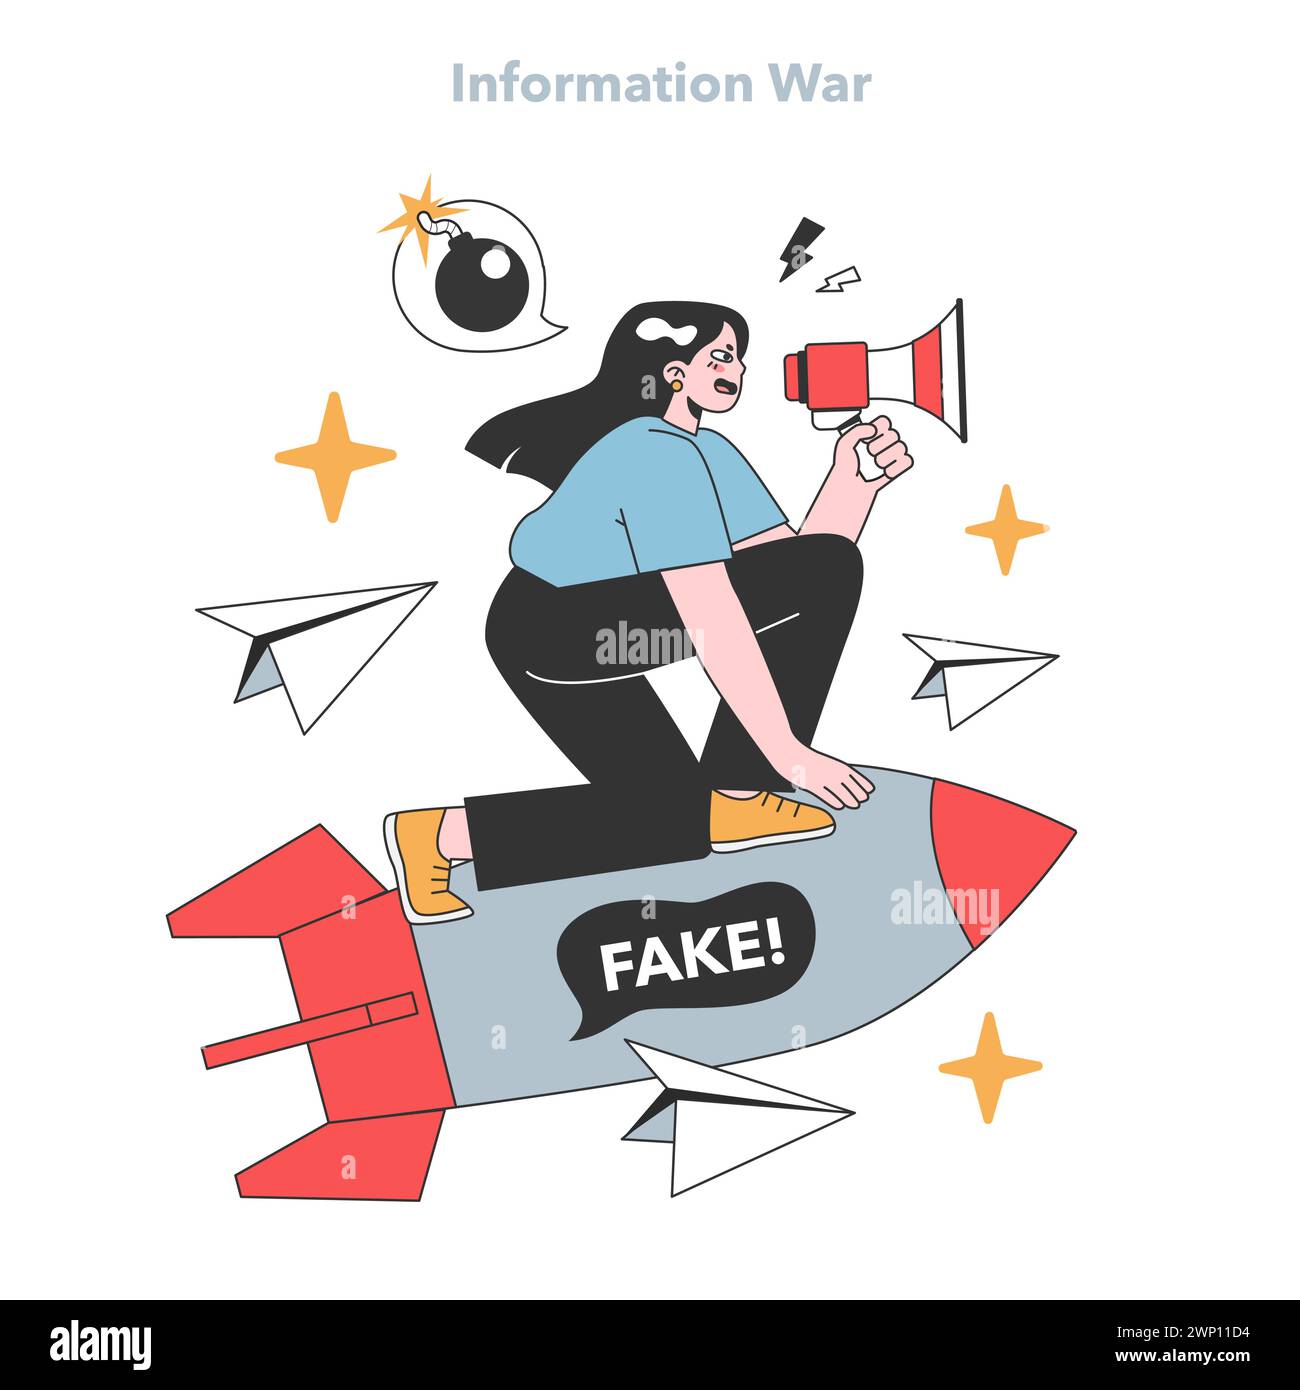 Determined woman riding a rocket, denouncing misinformation with a megaphone amid explosive fake news alerts. Flat vector illustration. Stock Vector